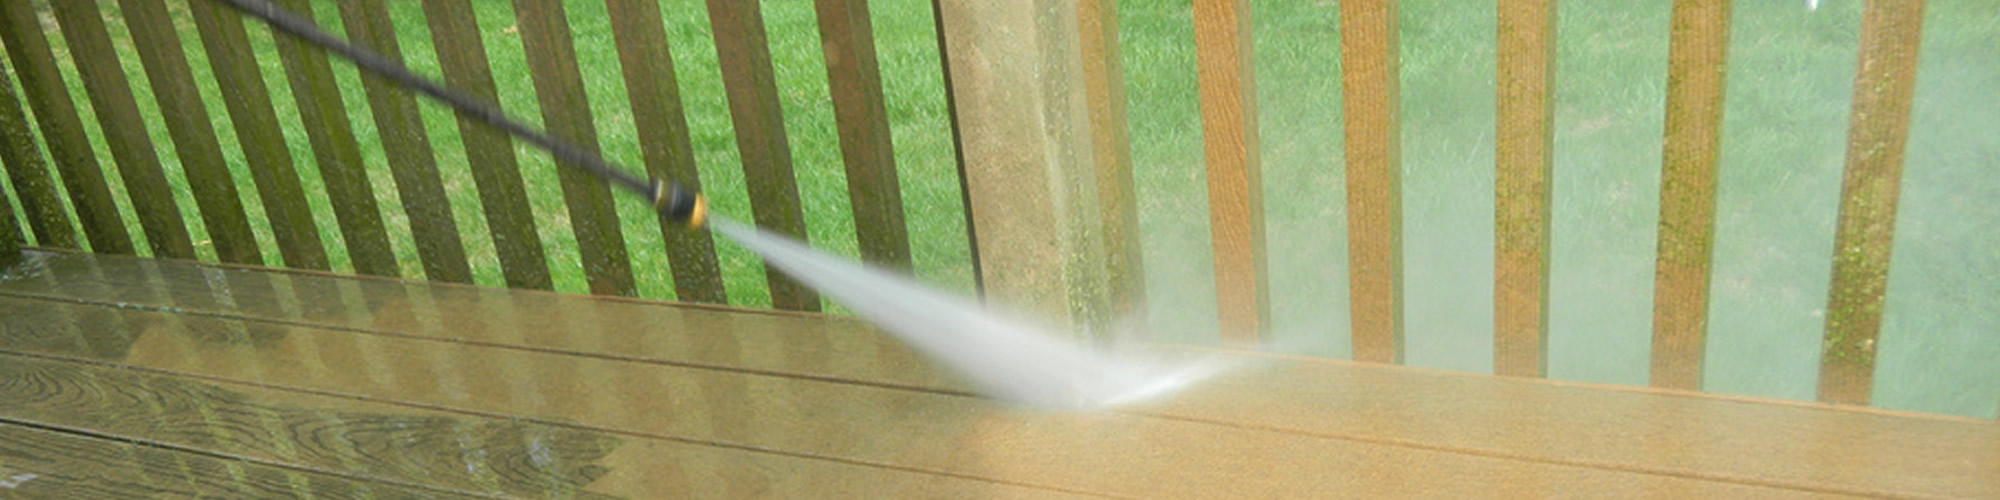 Power Washing Services Delafield Wisconsin